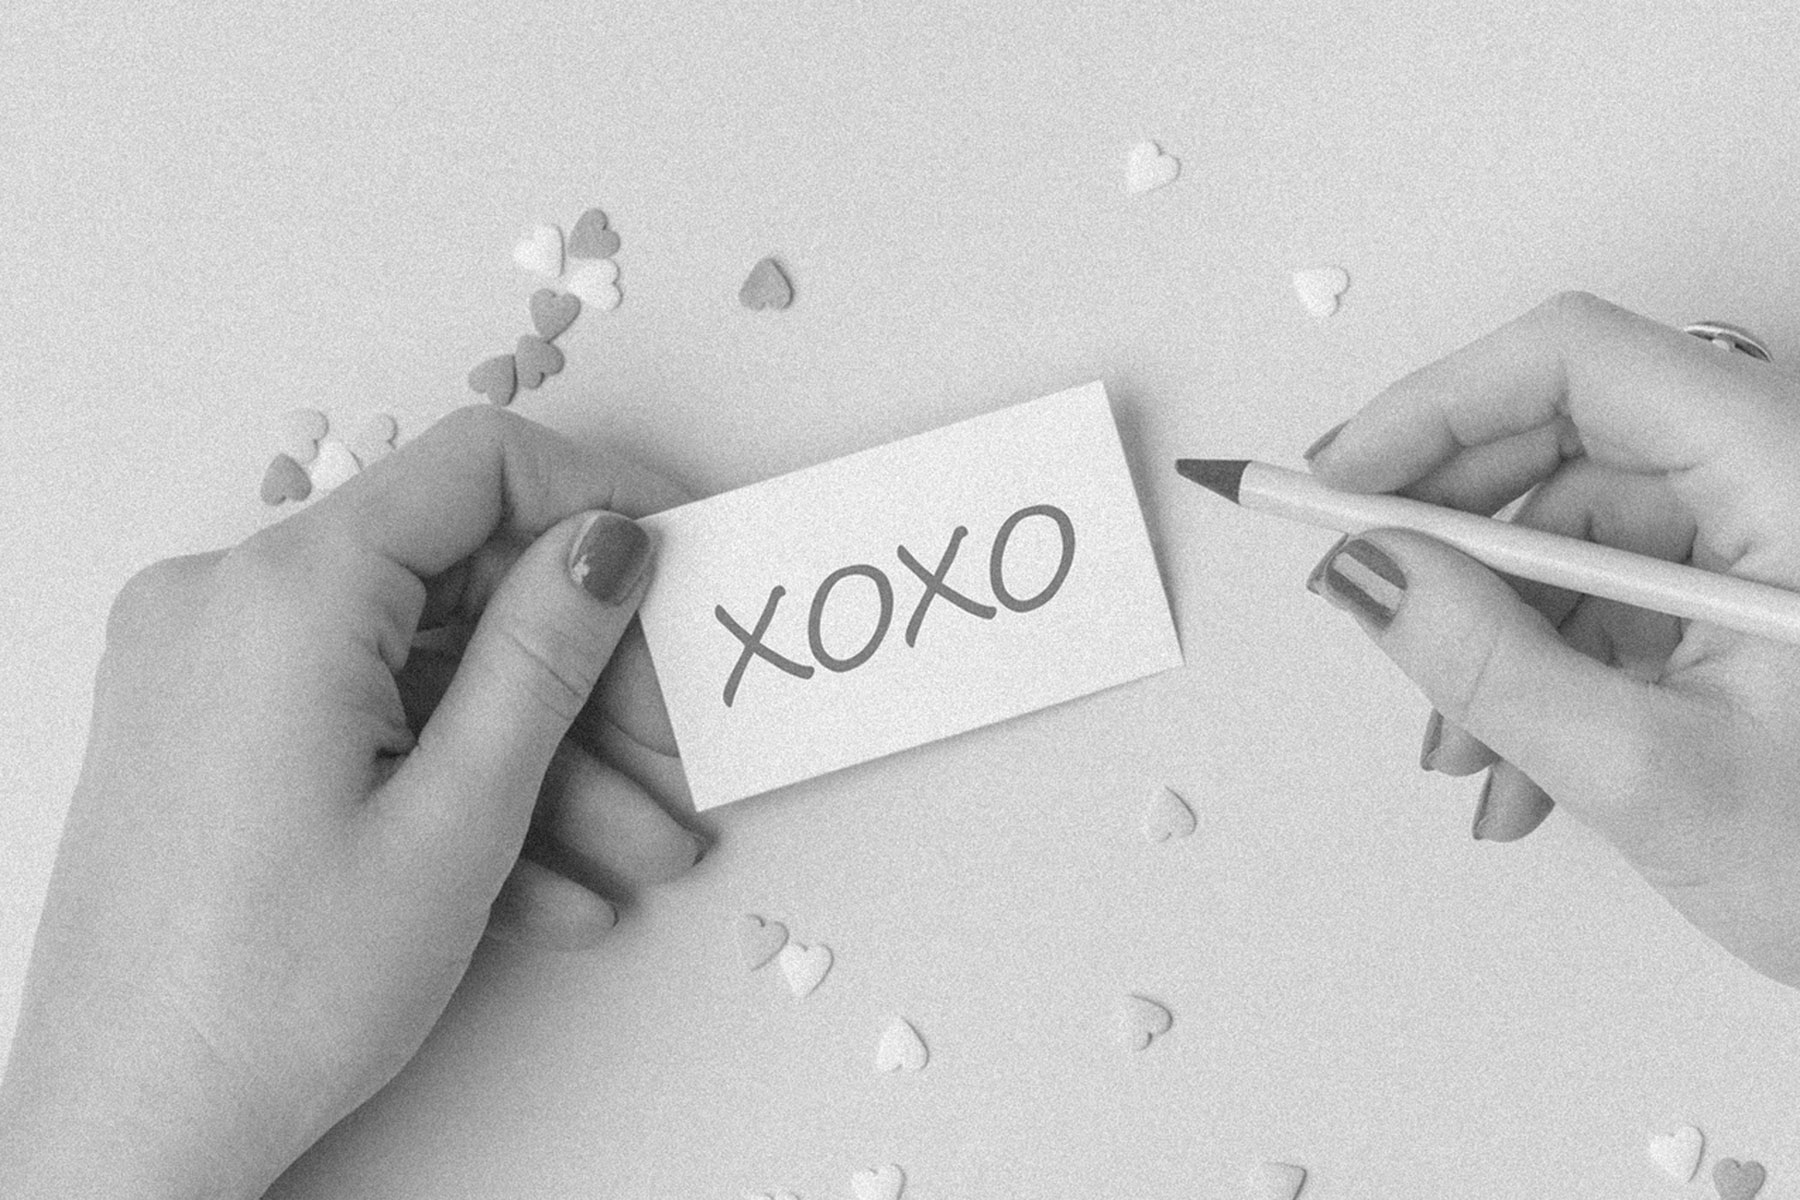 “XOXO” on note card